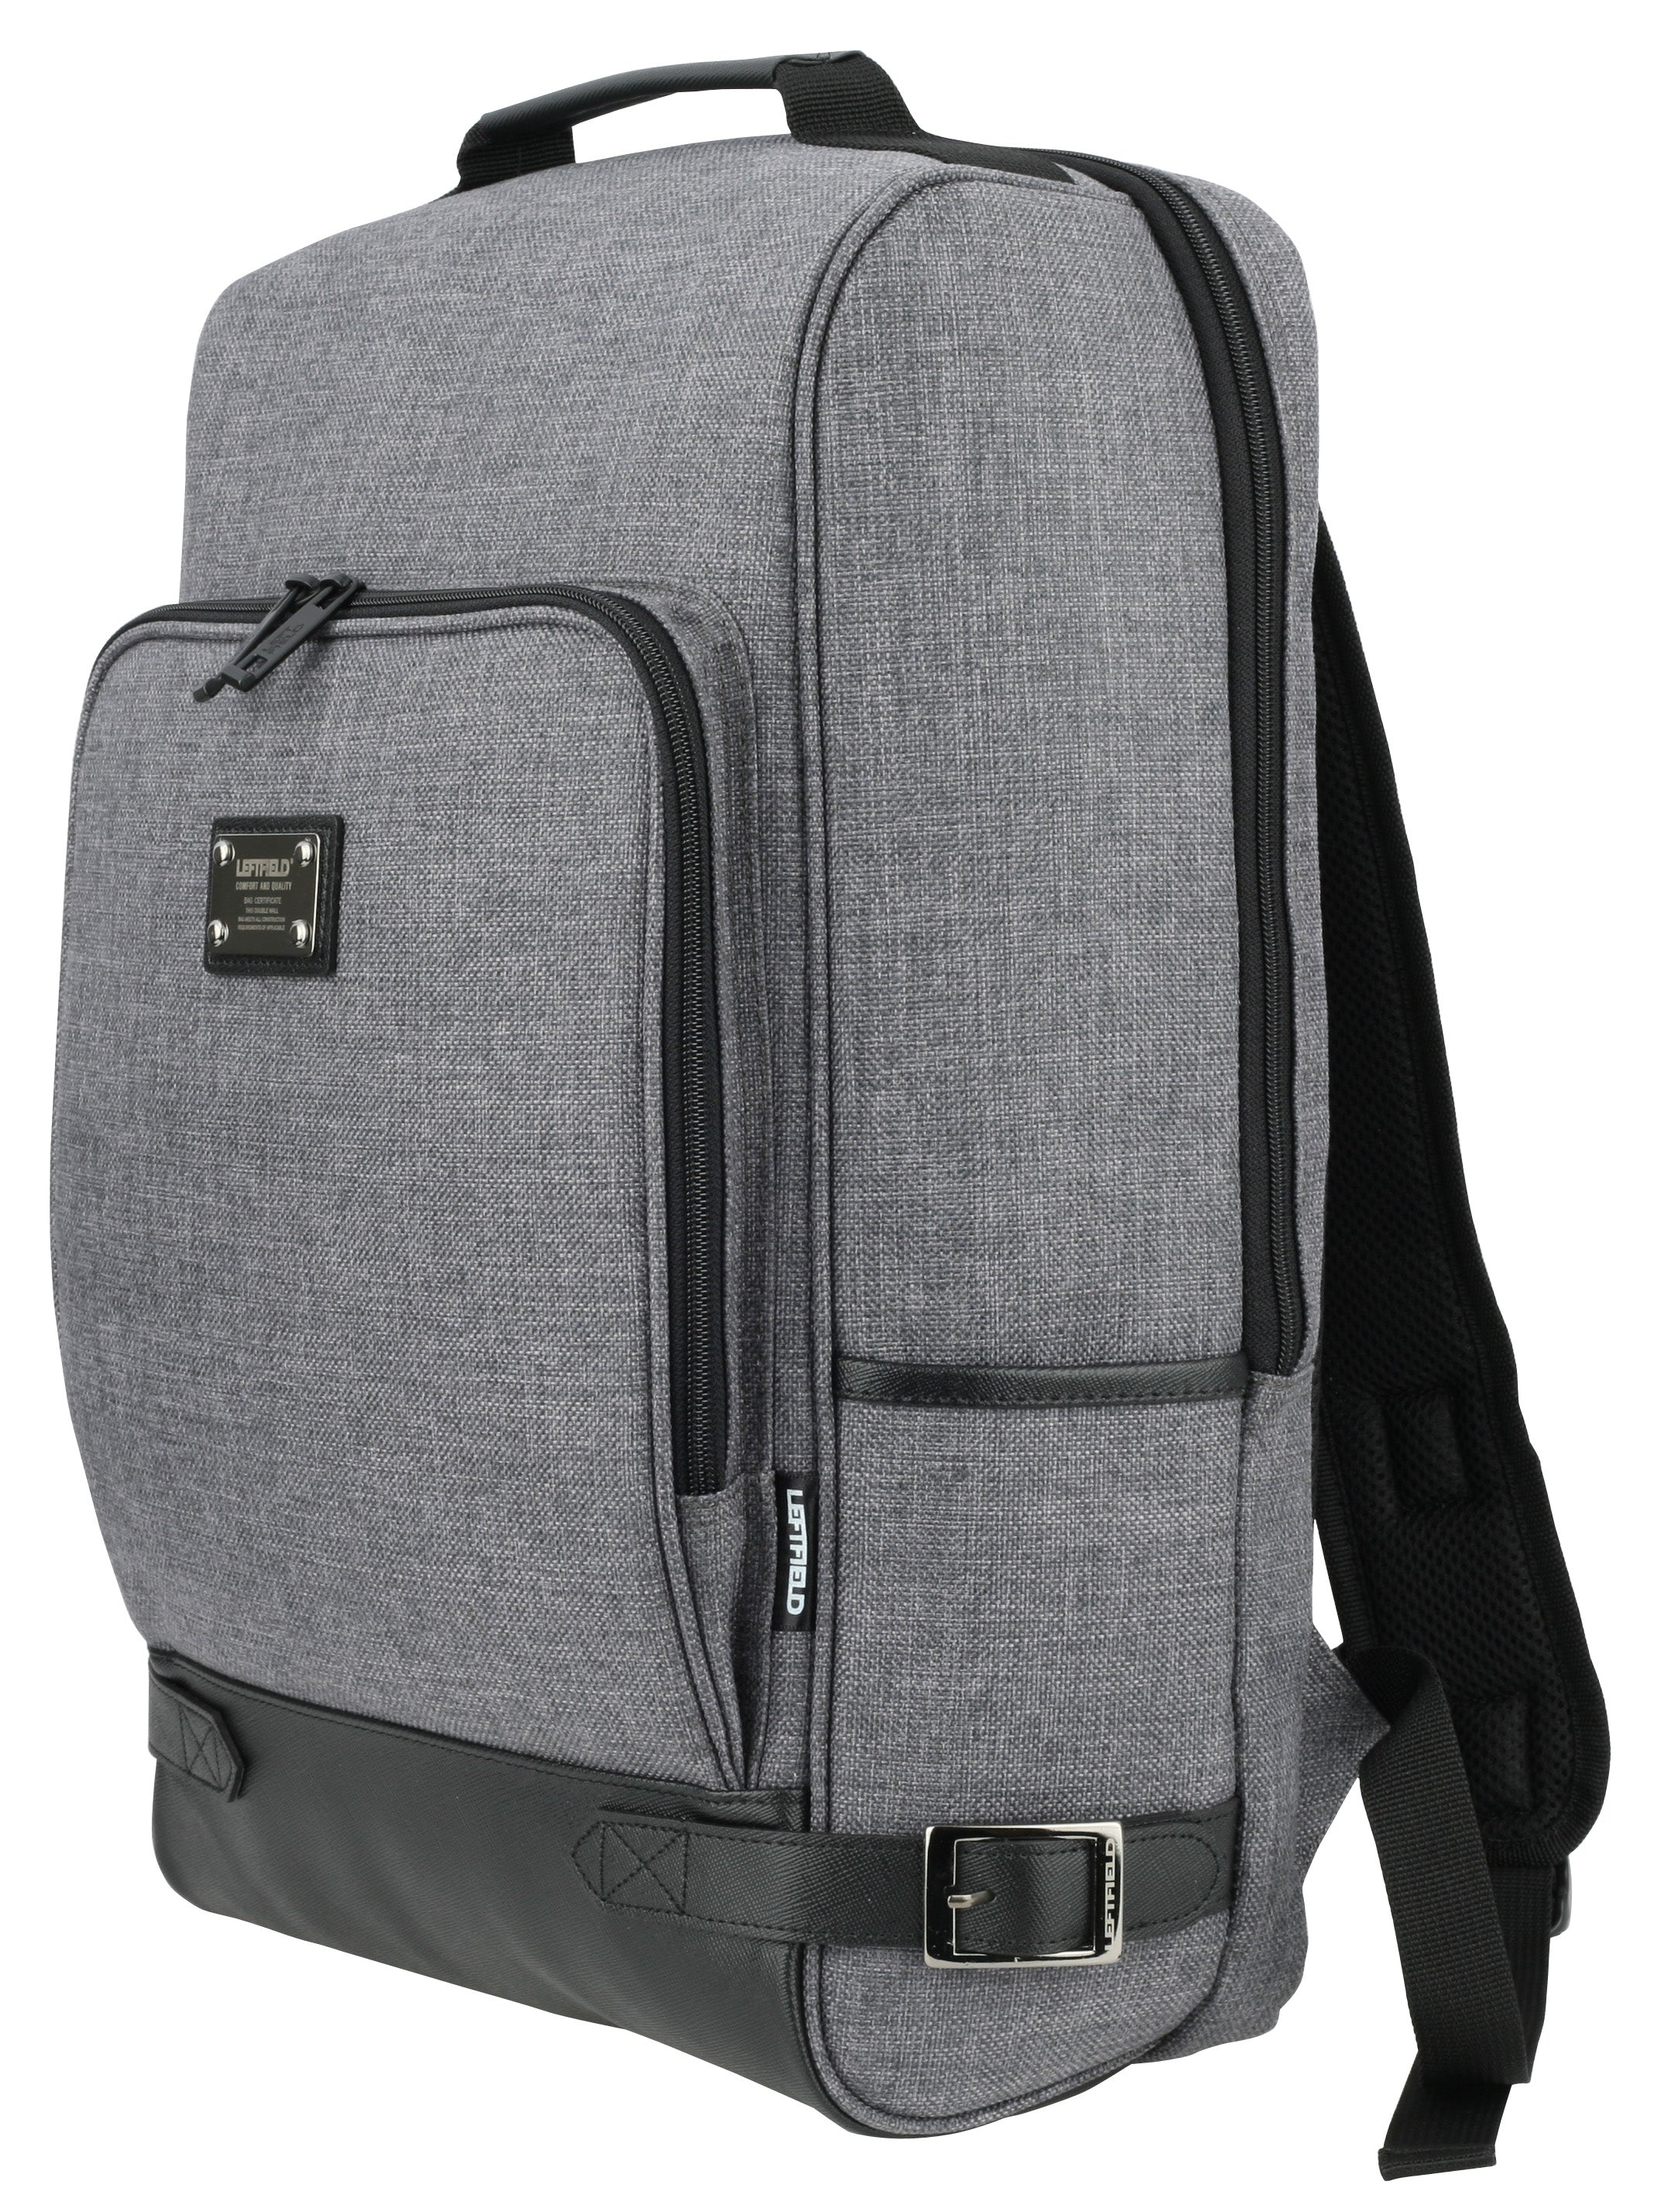 Gray Business Casual Laptop Backpacks